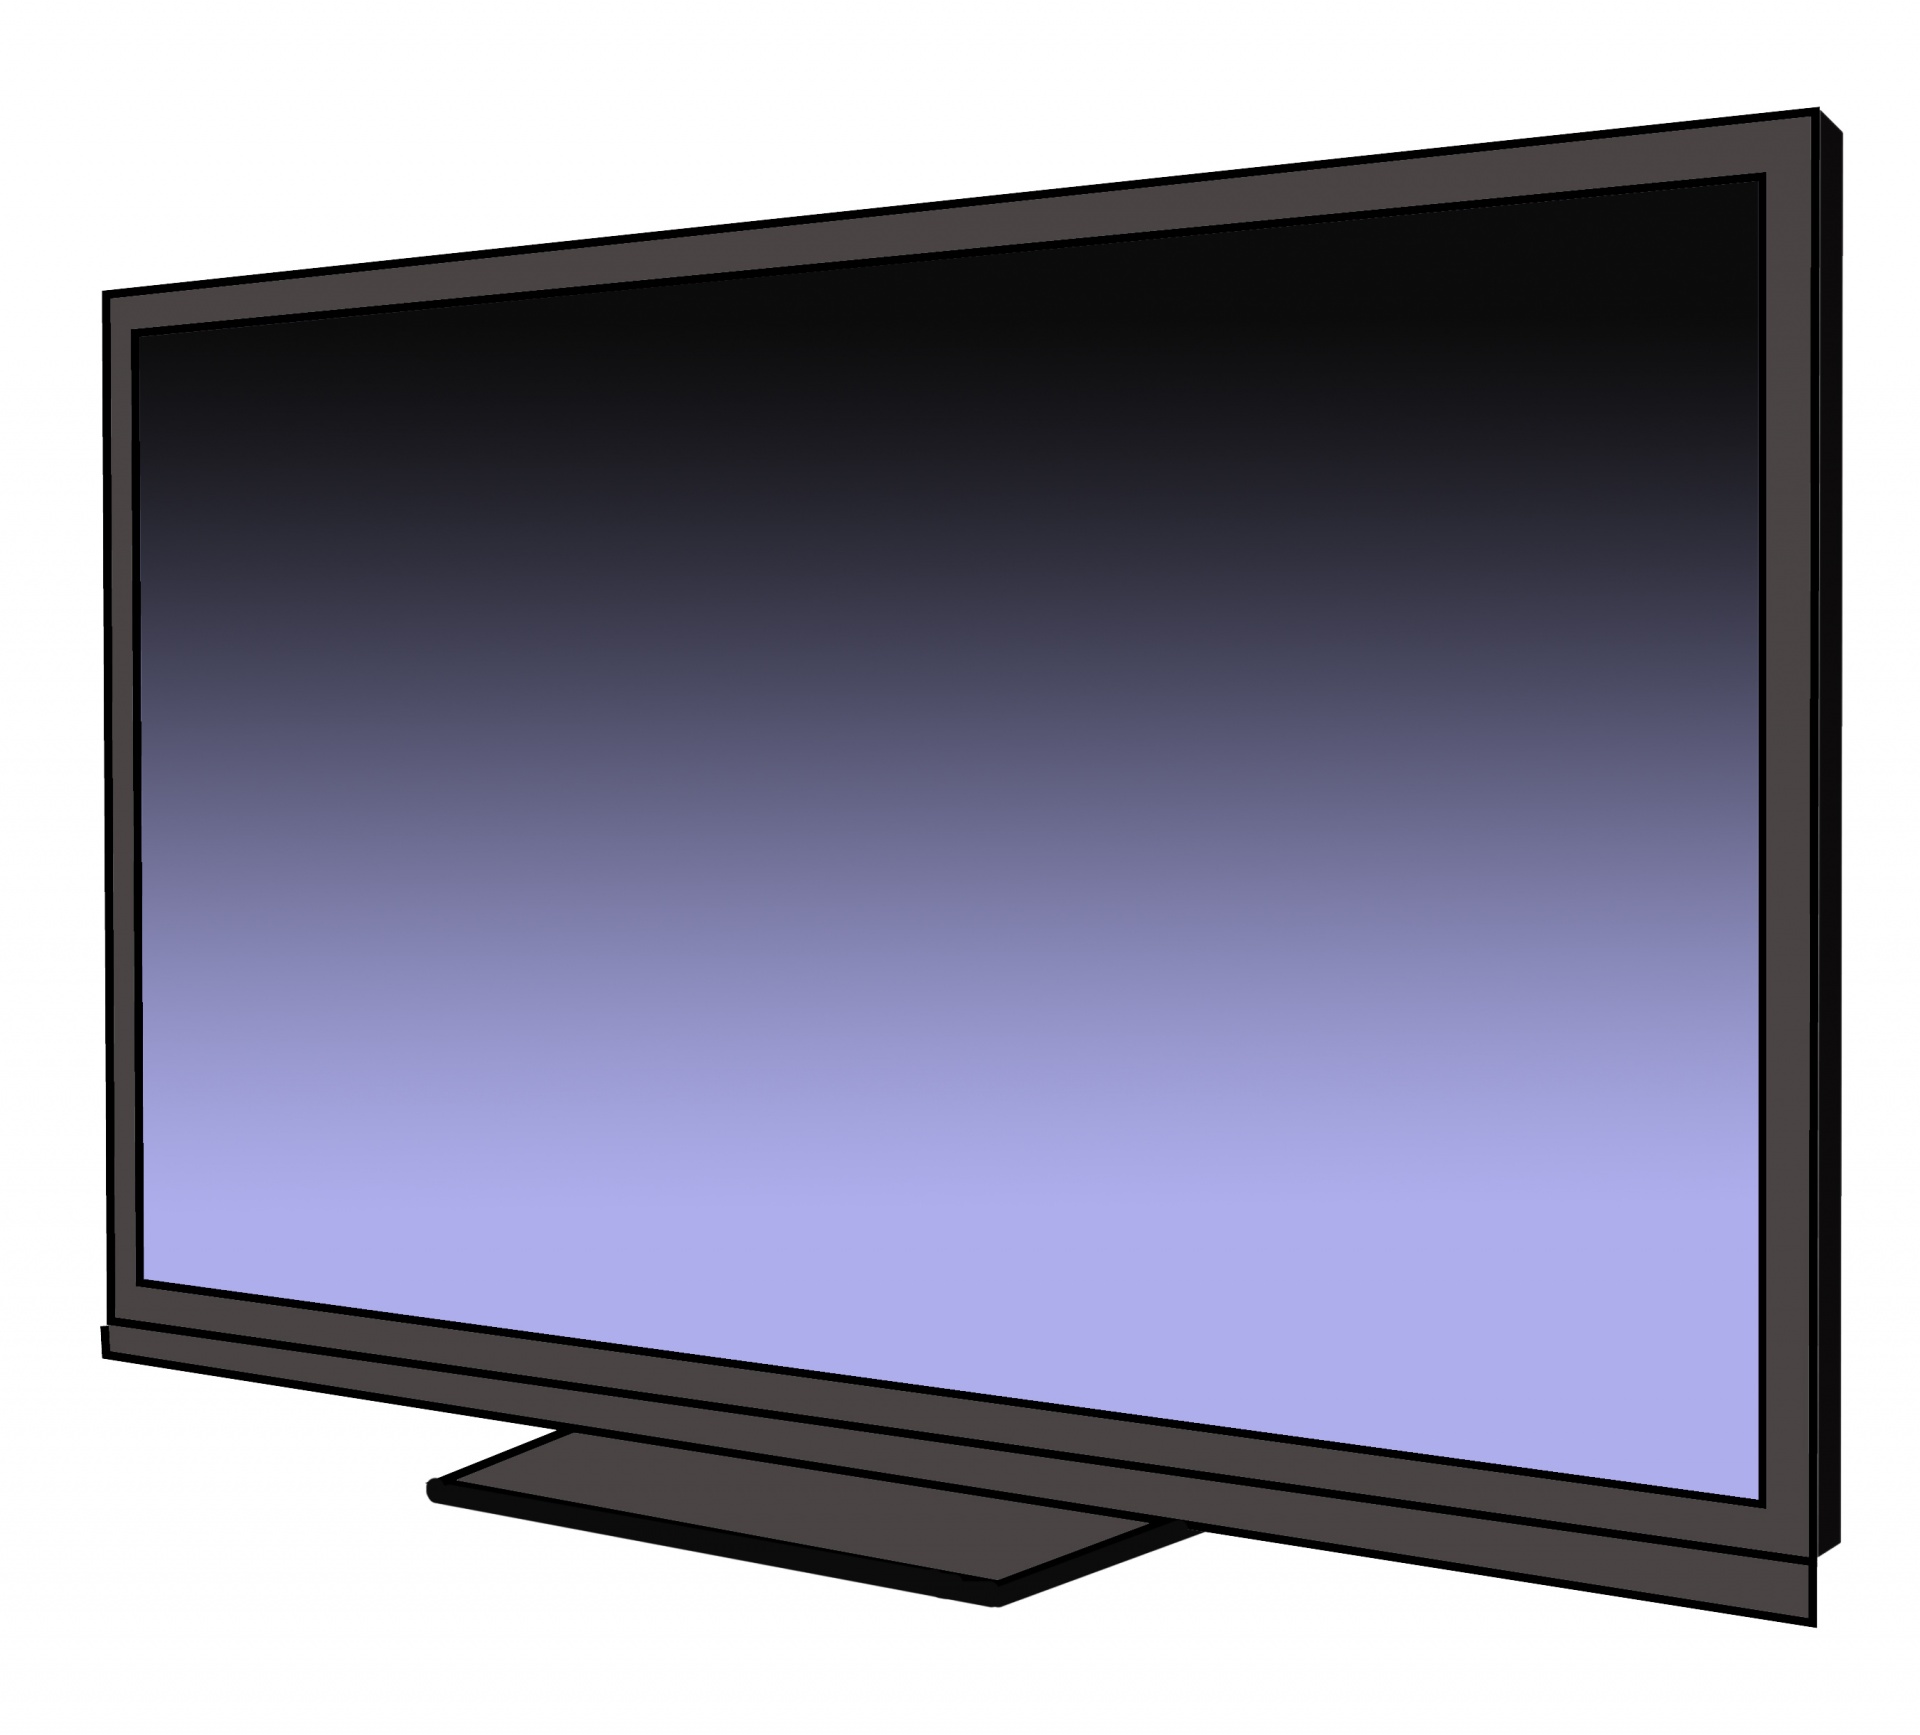 television clipart vector image free photo